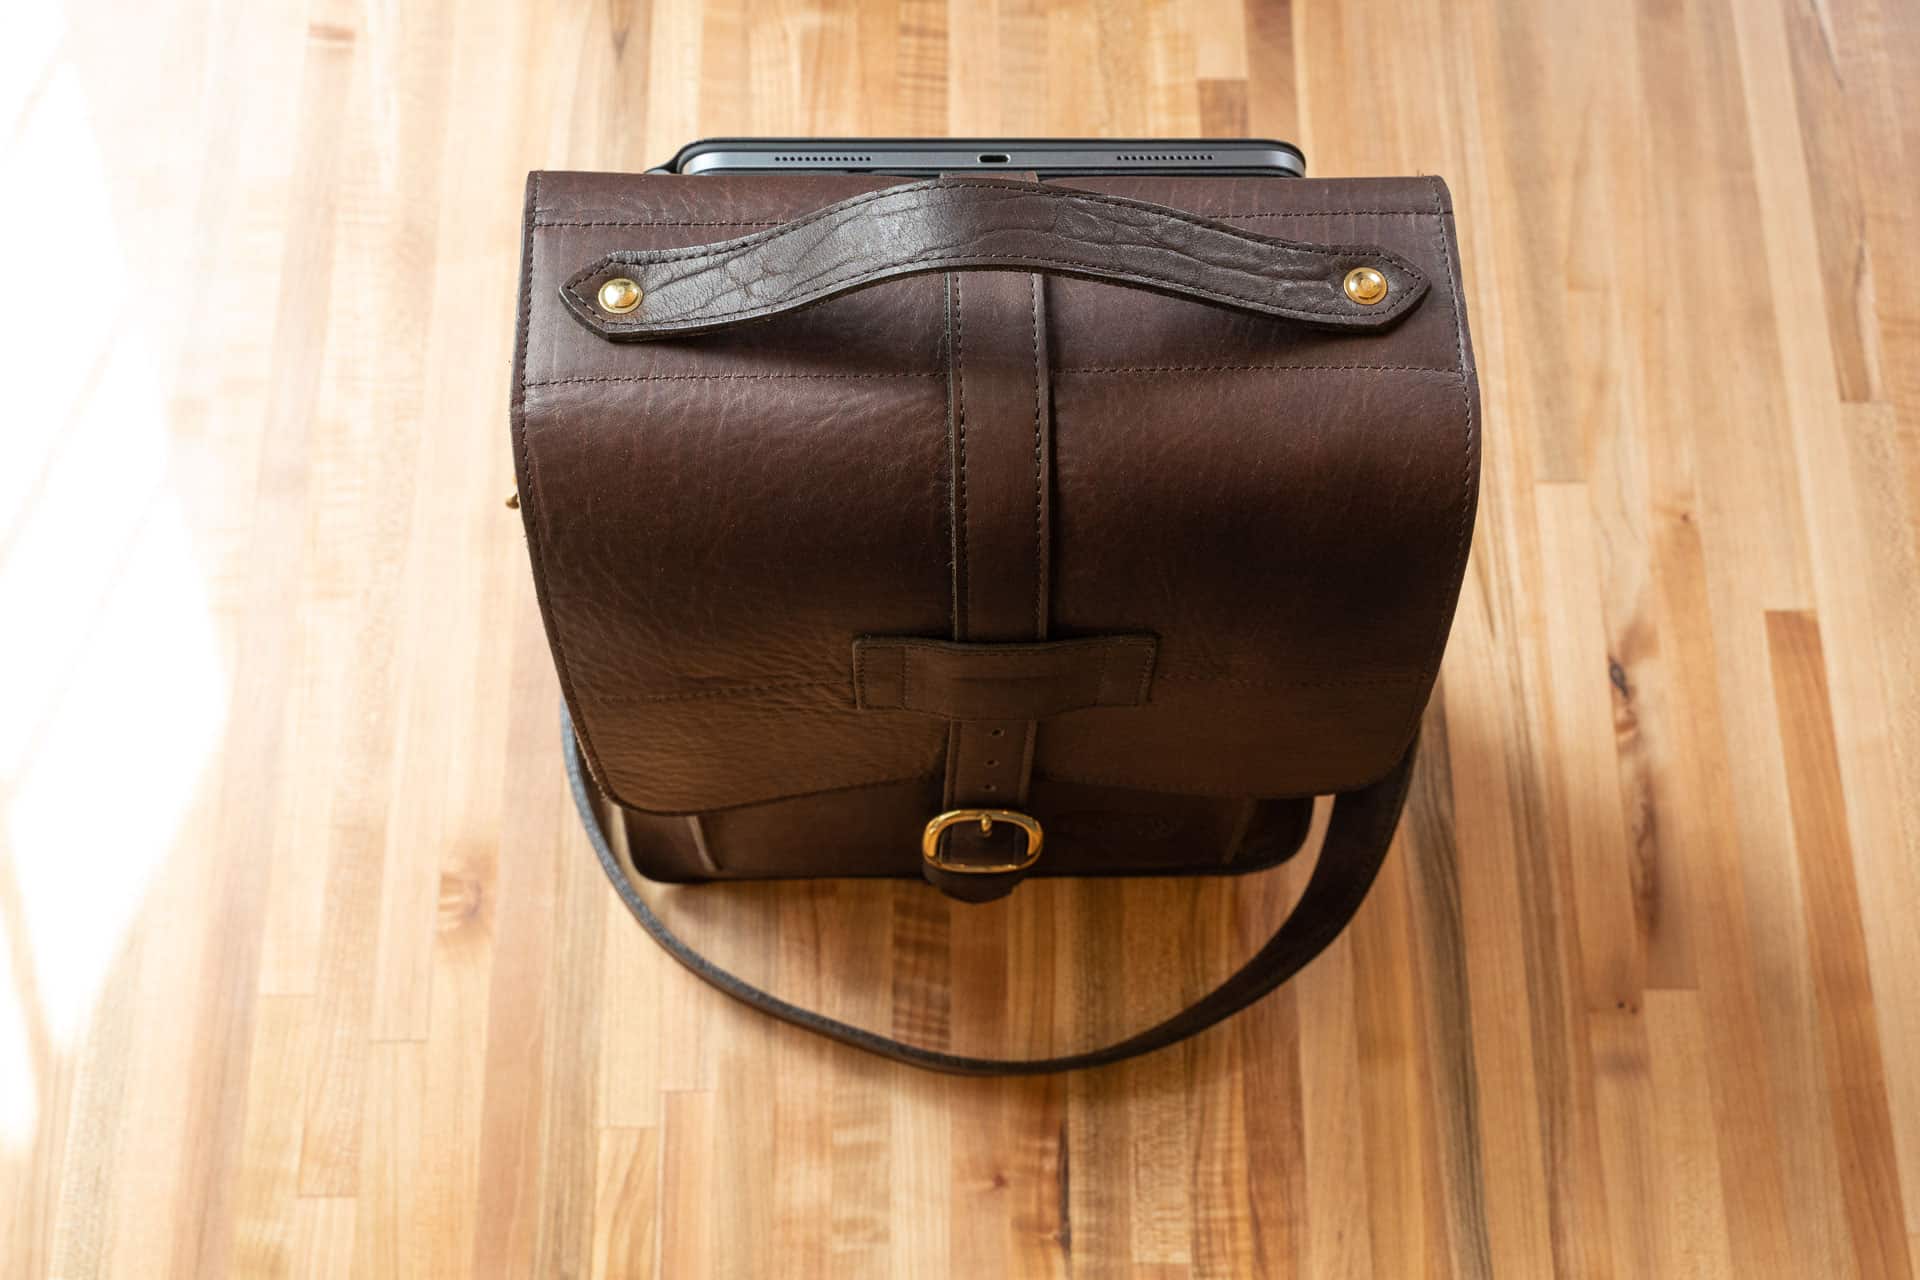  RUSTIC TOWN Leather Satchel iPad Tablet Bag - Leather